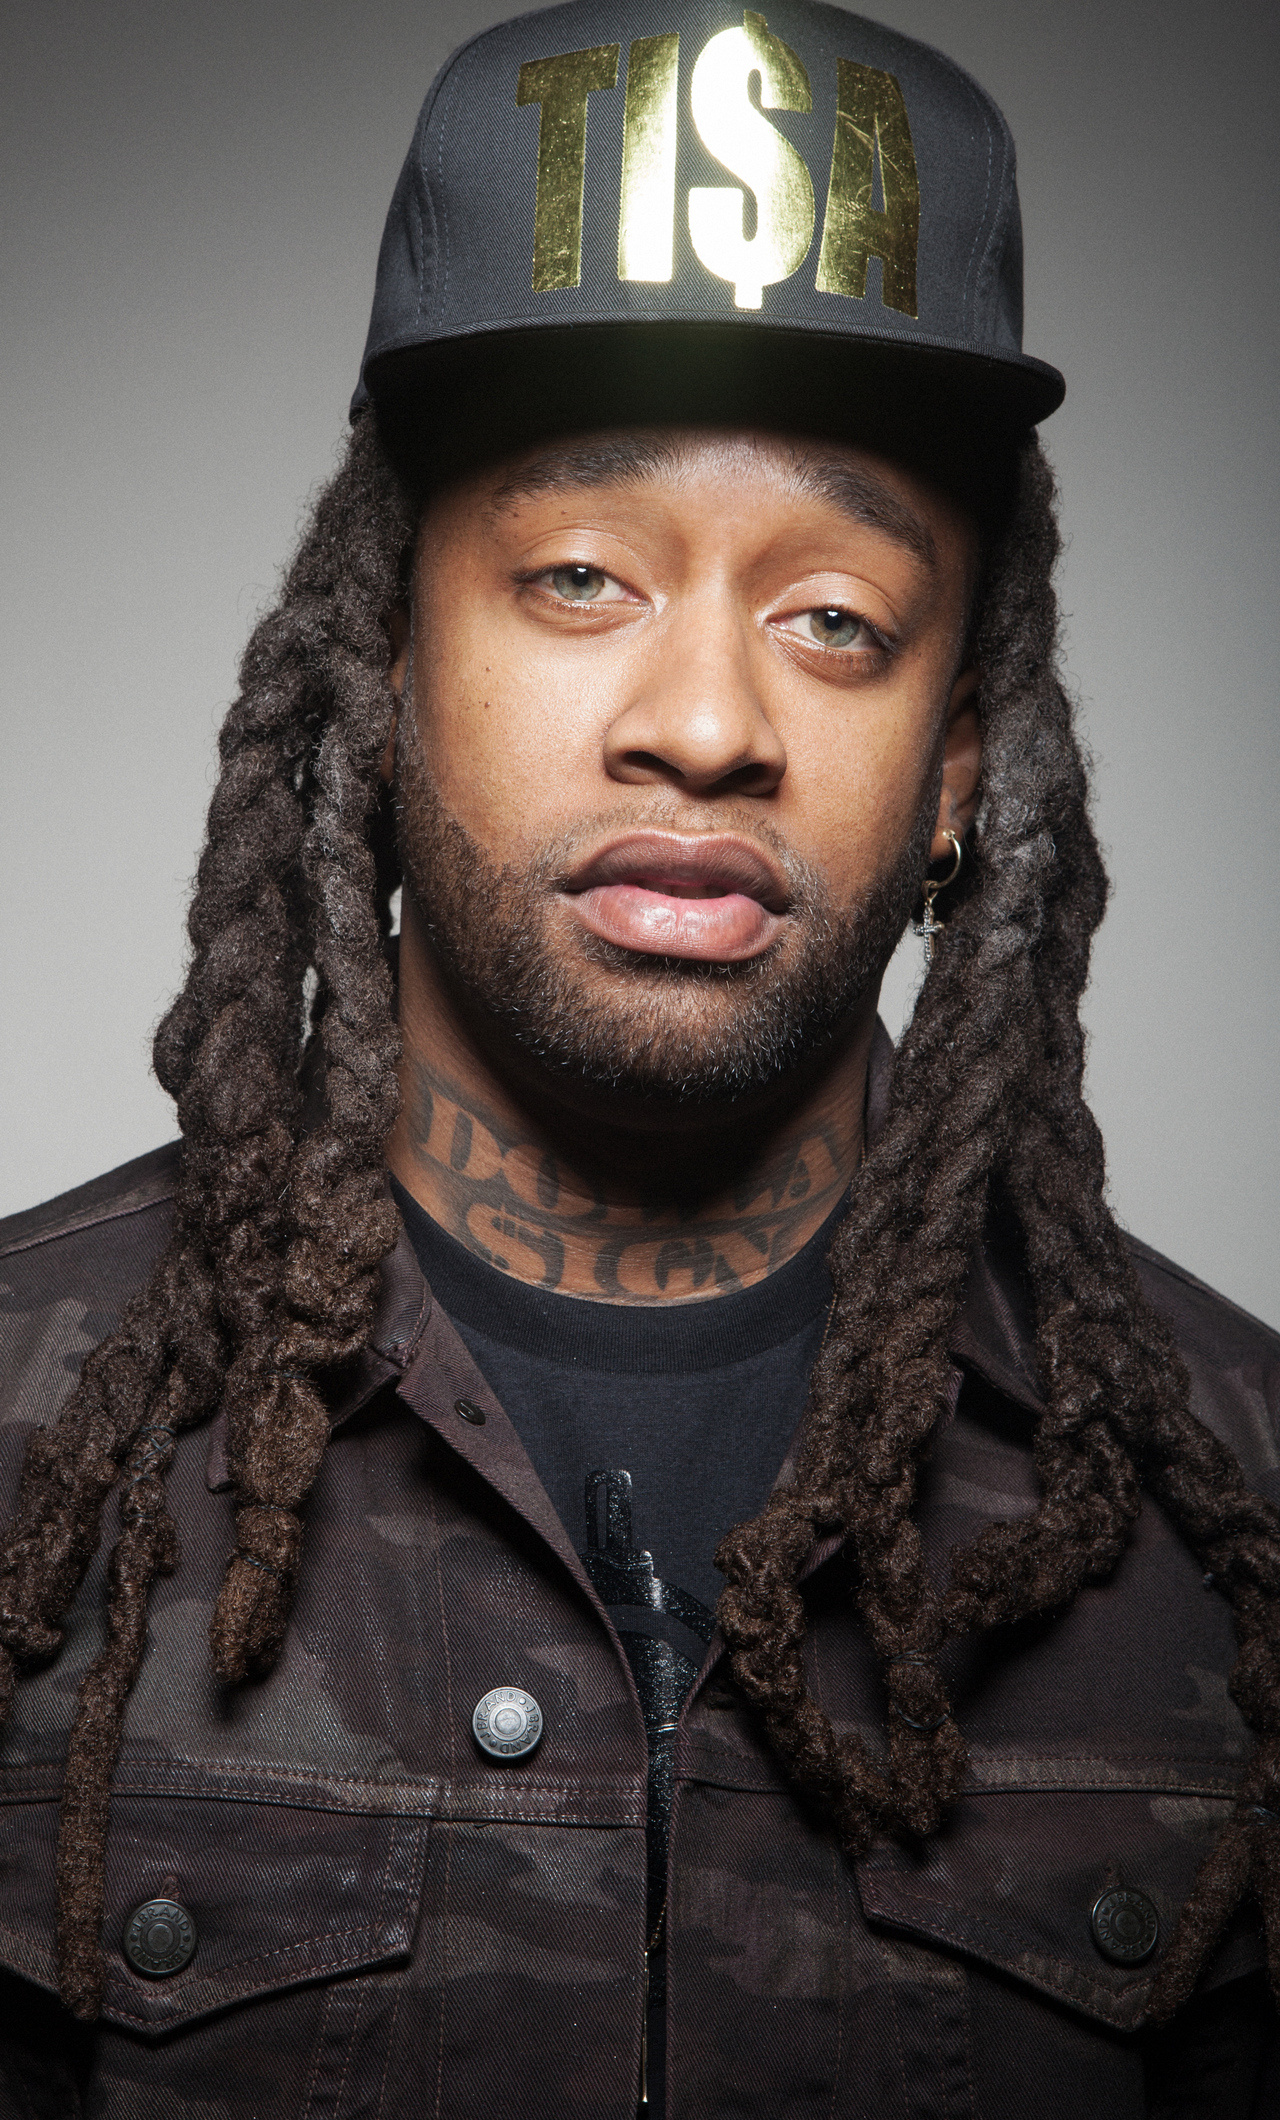 Ty Dolla Sign, iPhone 6 wallpaper, HD images, High-quality photos, 1280x2120 HD Phone